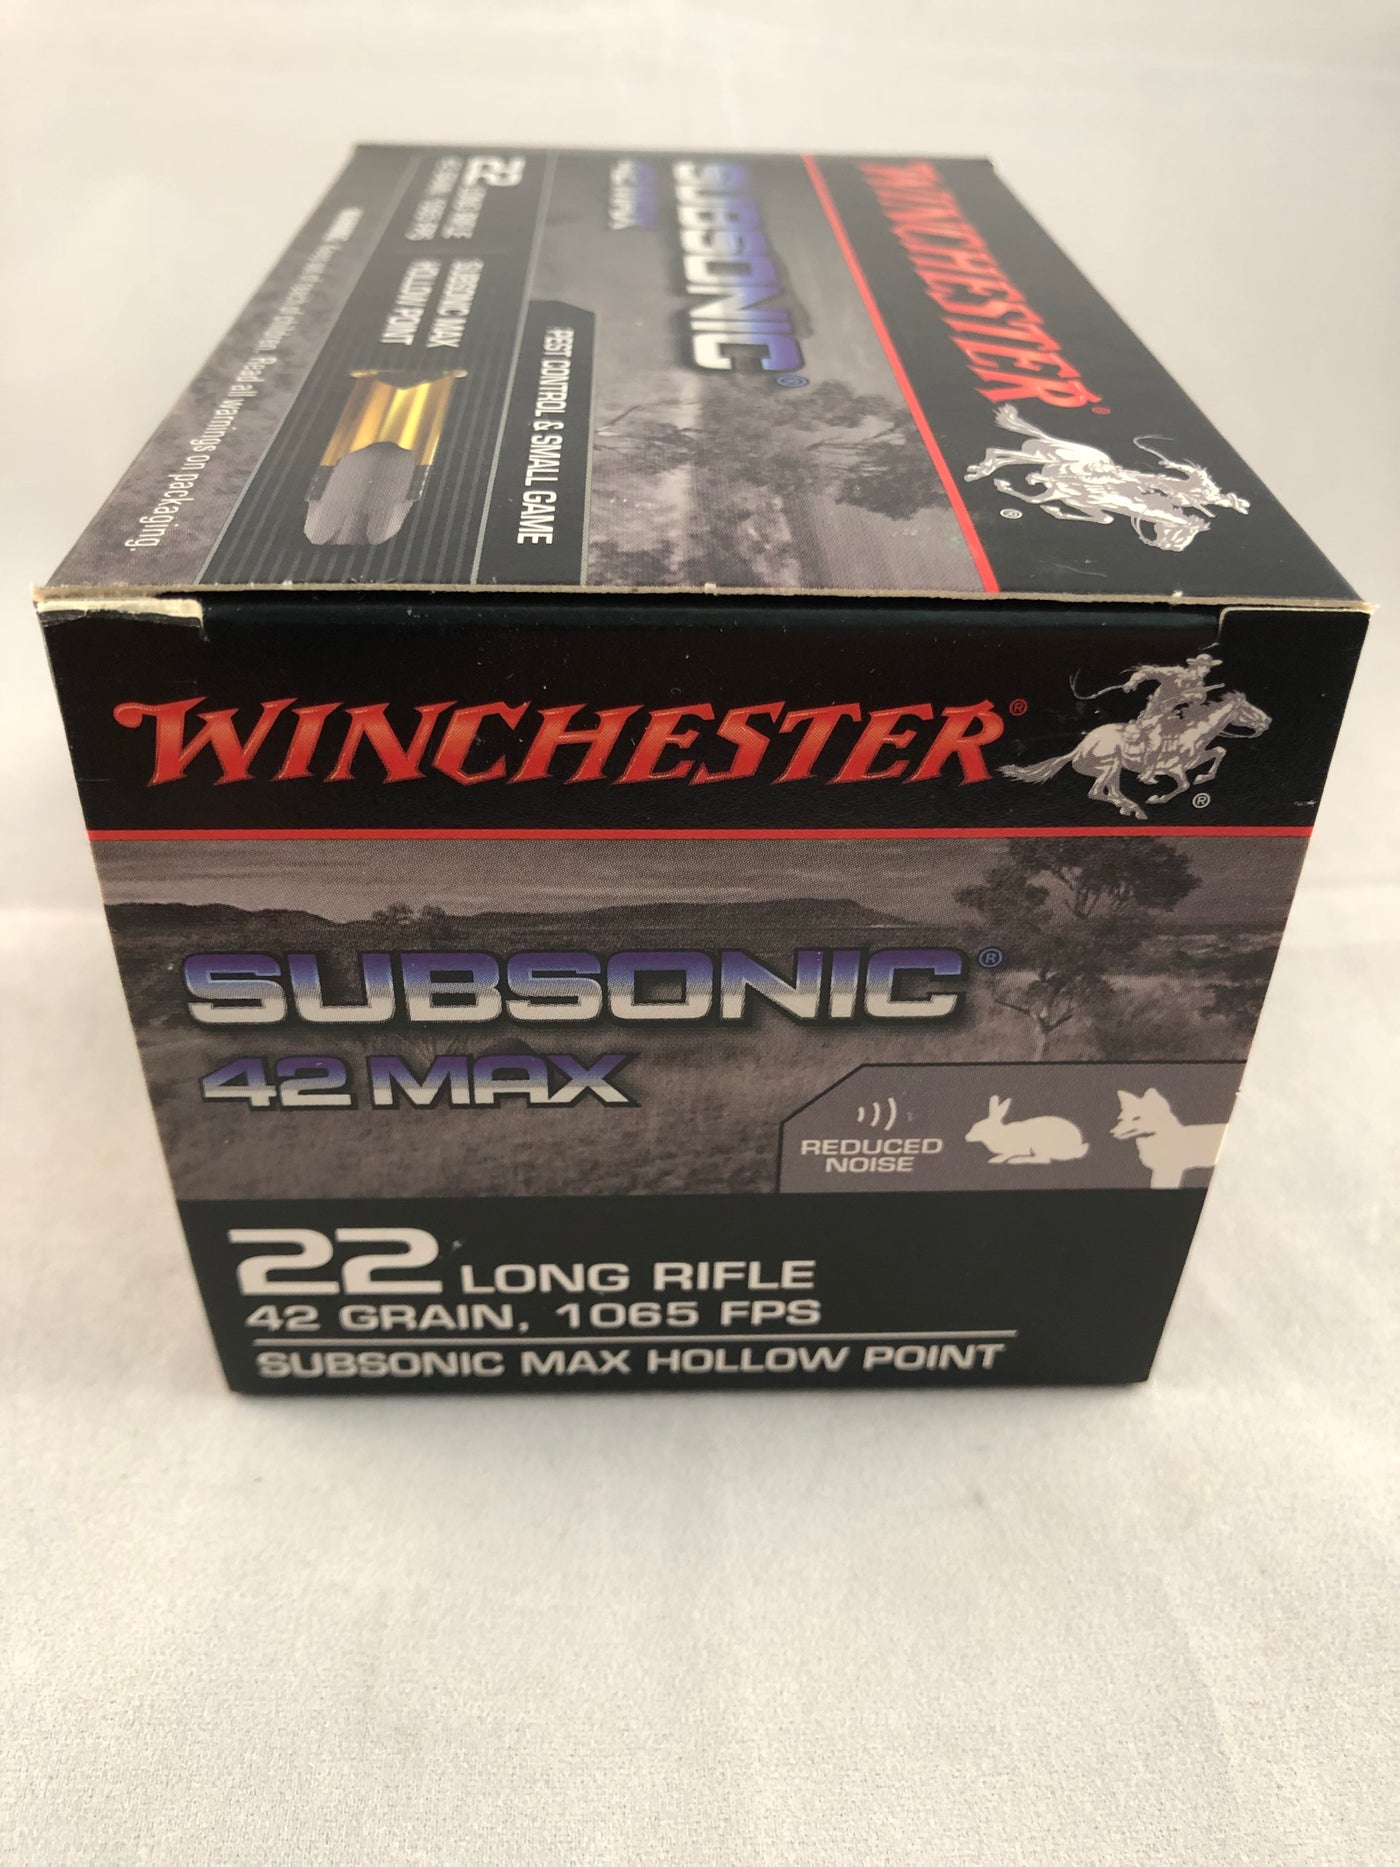 Winchester 22LR 42gr Subsonic Max Hollow Point - BLUE COLLAR RELOADING